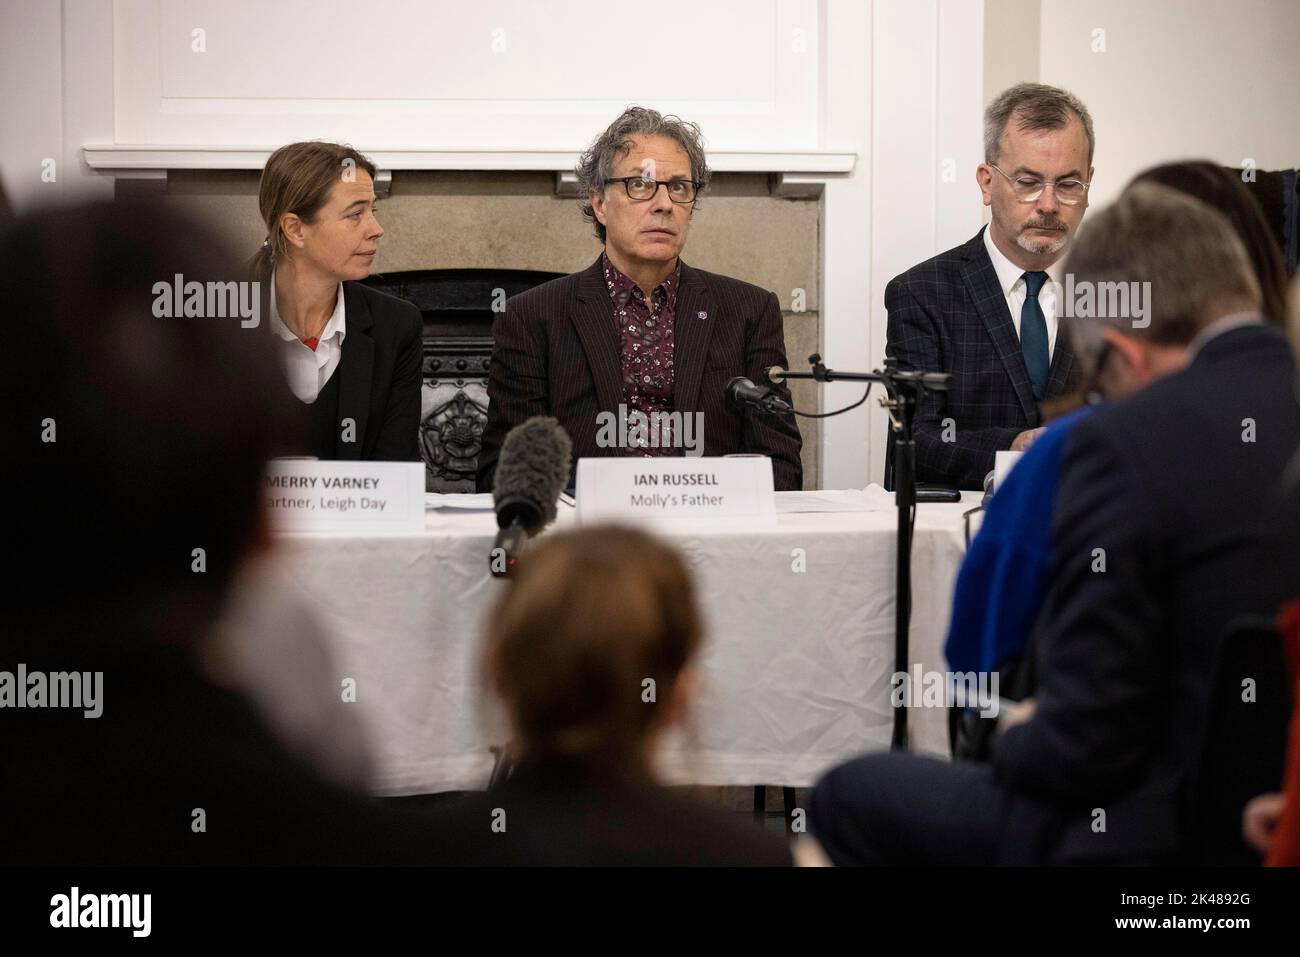 London, UK. 30th Sep, 2022. PHOTO:JEFF GILBERT 30th September 2022 Barnet, North London, UK Ian Russell (Molly's father), speaking at a press conference on the final day of the Molly Russell inquest at North London CoronoerÕs Court. Credit: Jeff Gilbert/Alamy Live News Stock Photo